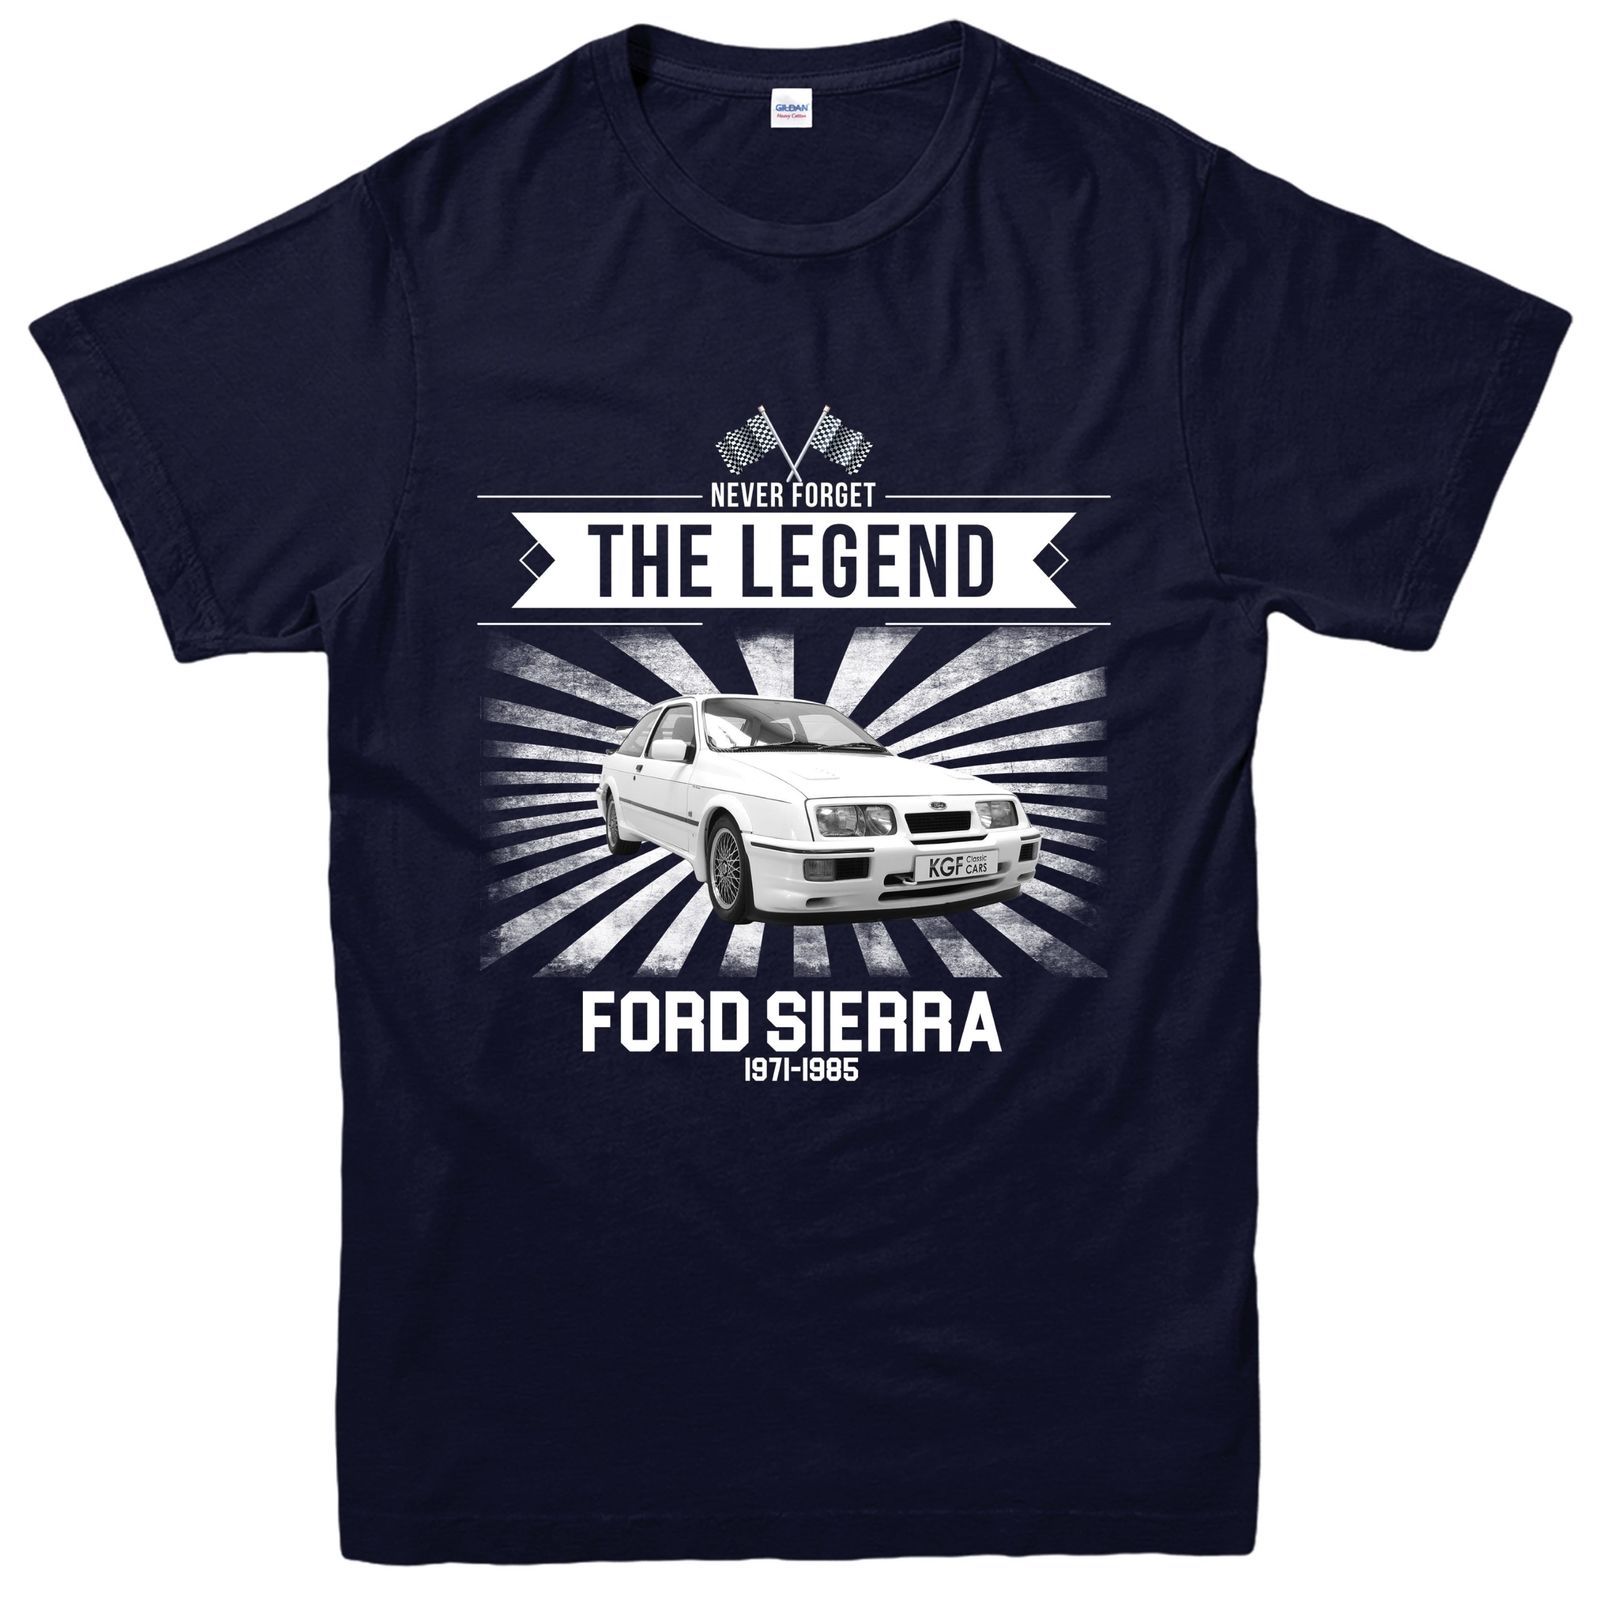 fee stoom Ideaal Ford Sierra T Shirt, Never Forget The Legends Cars Design Tee Top Casual  Funny Unisex Tee Gift From Stop_to_shop, $12.96 | DHgate.Com